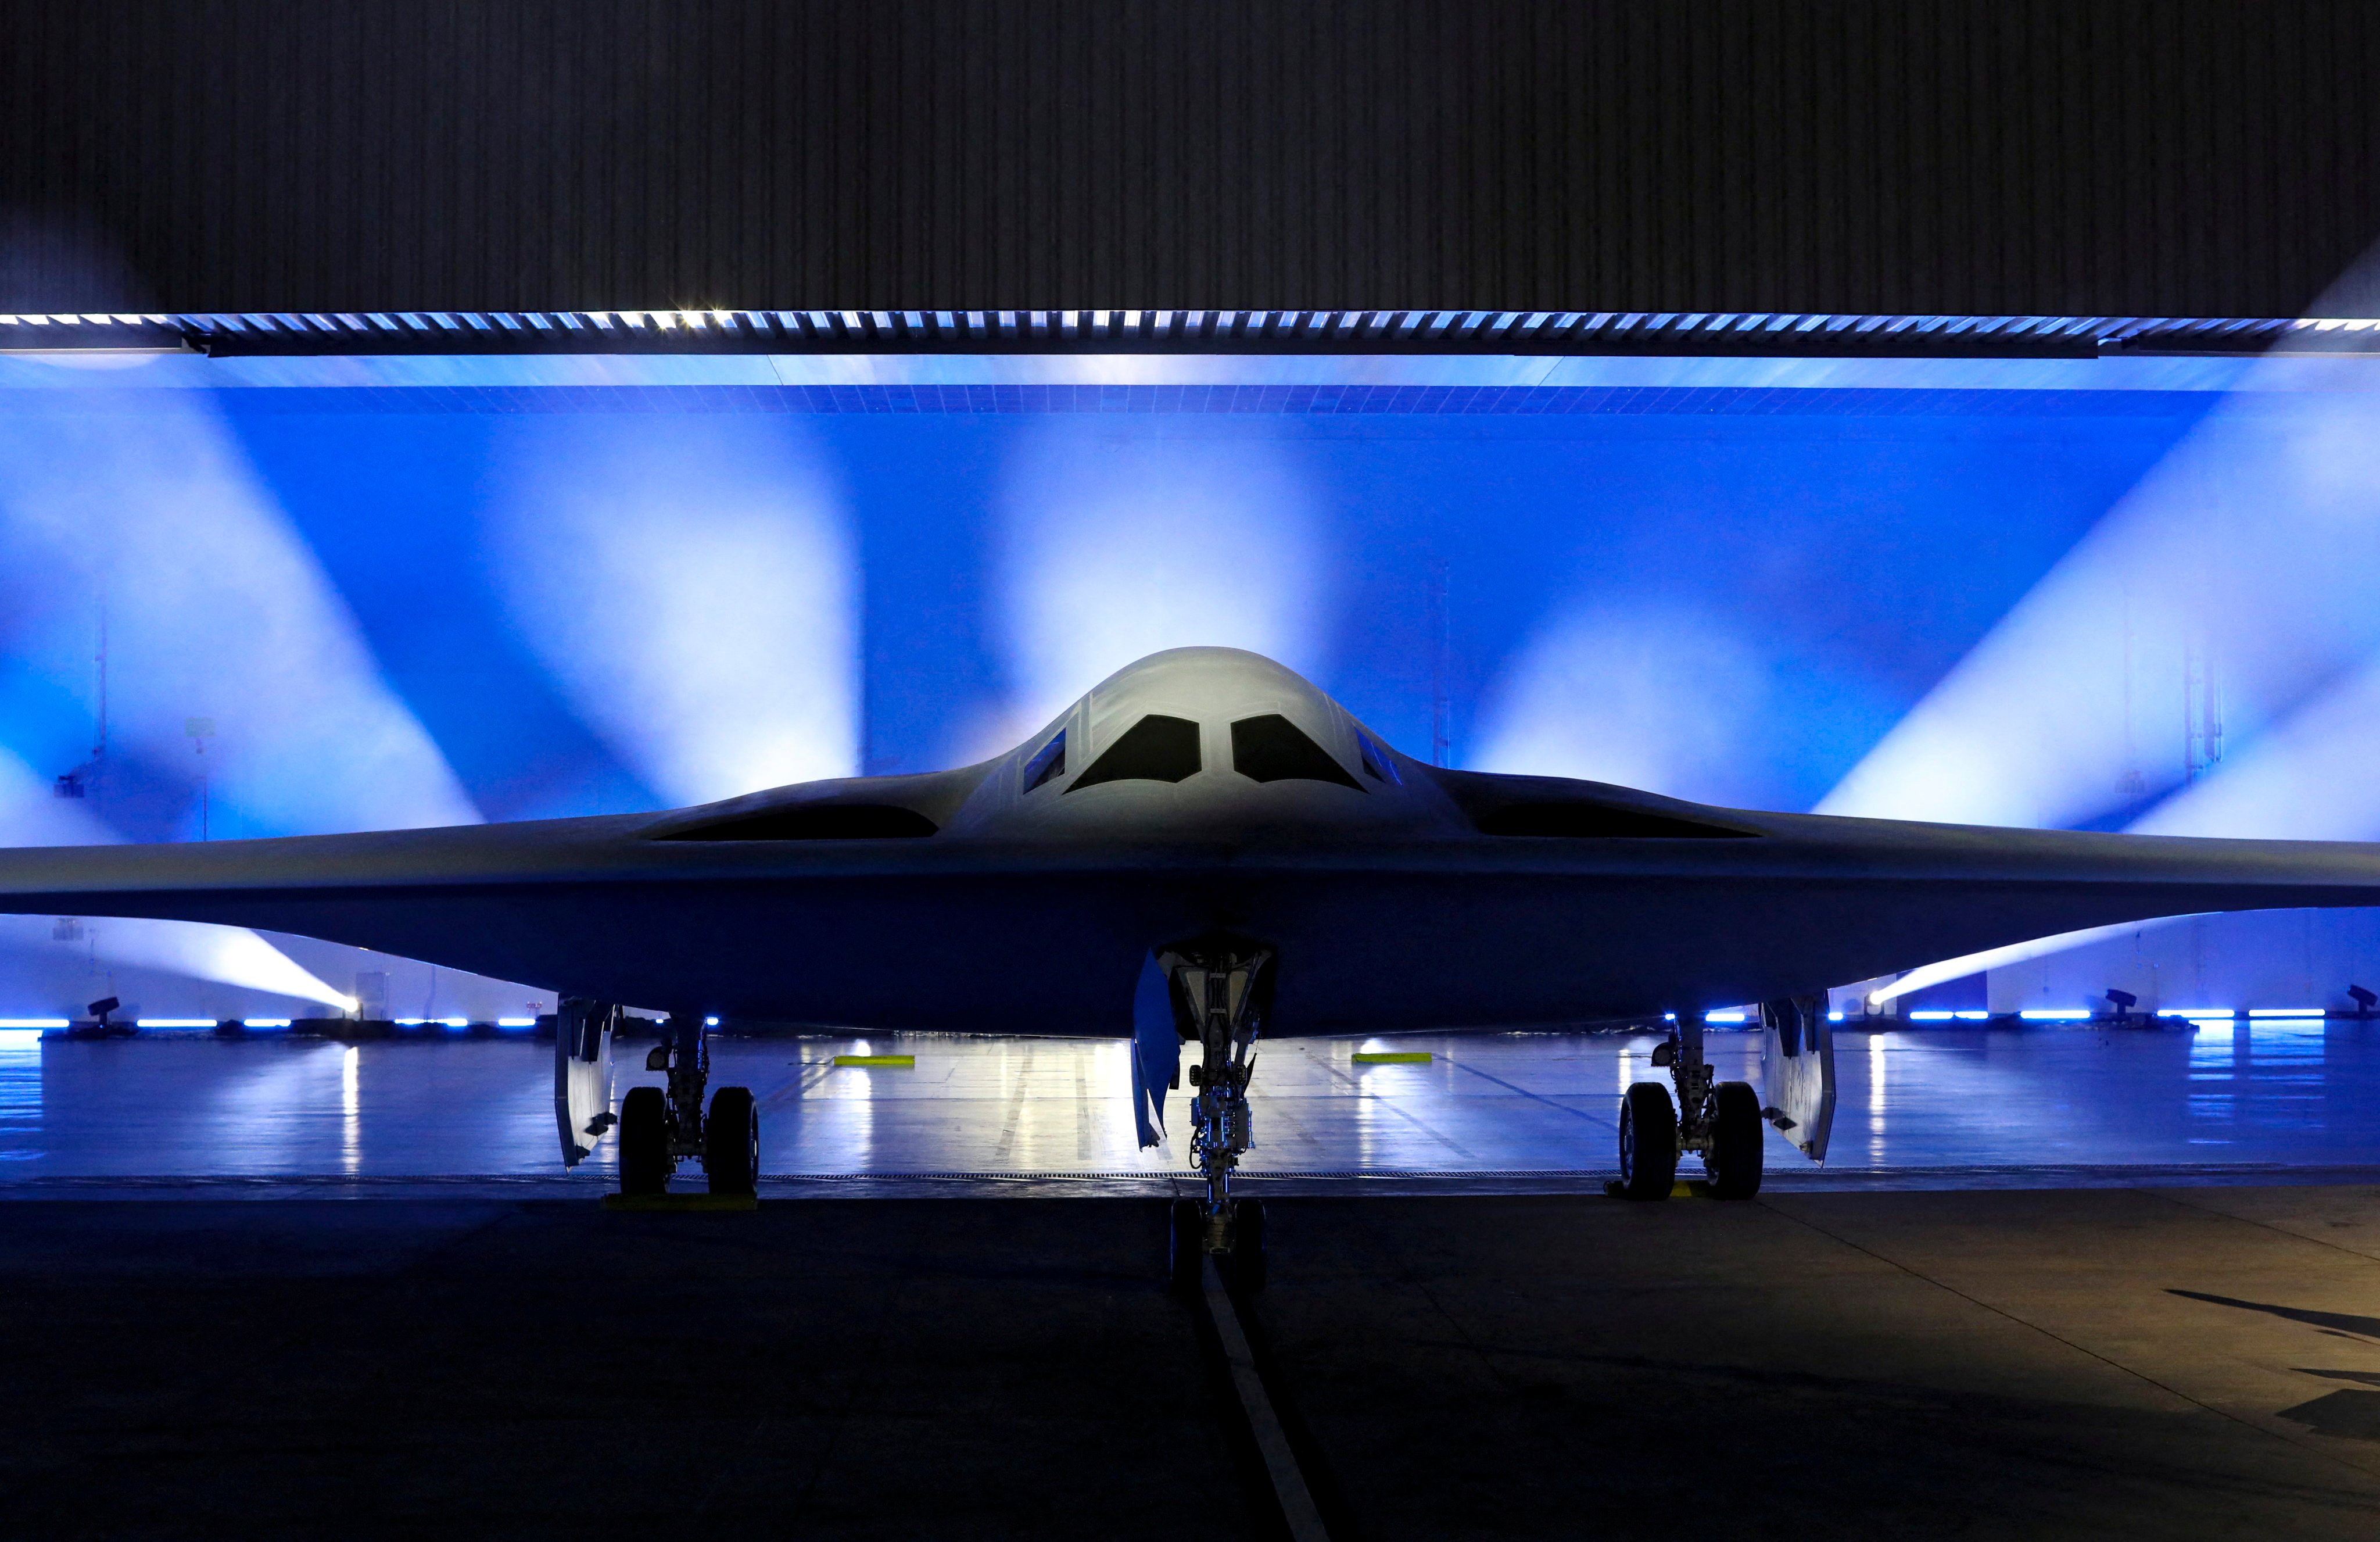 The B-21 Raider goes on display in California, but with many details remaining hidden in the shadows.  Photo: Reuters